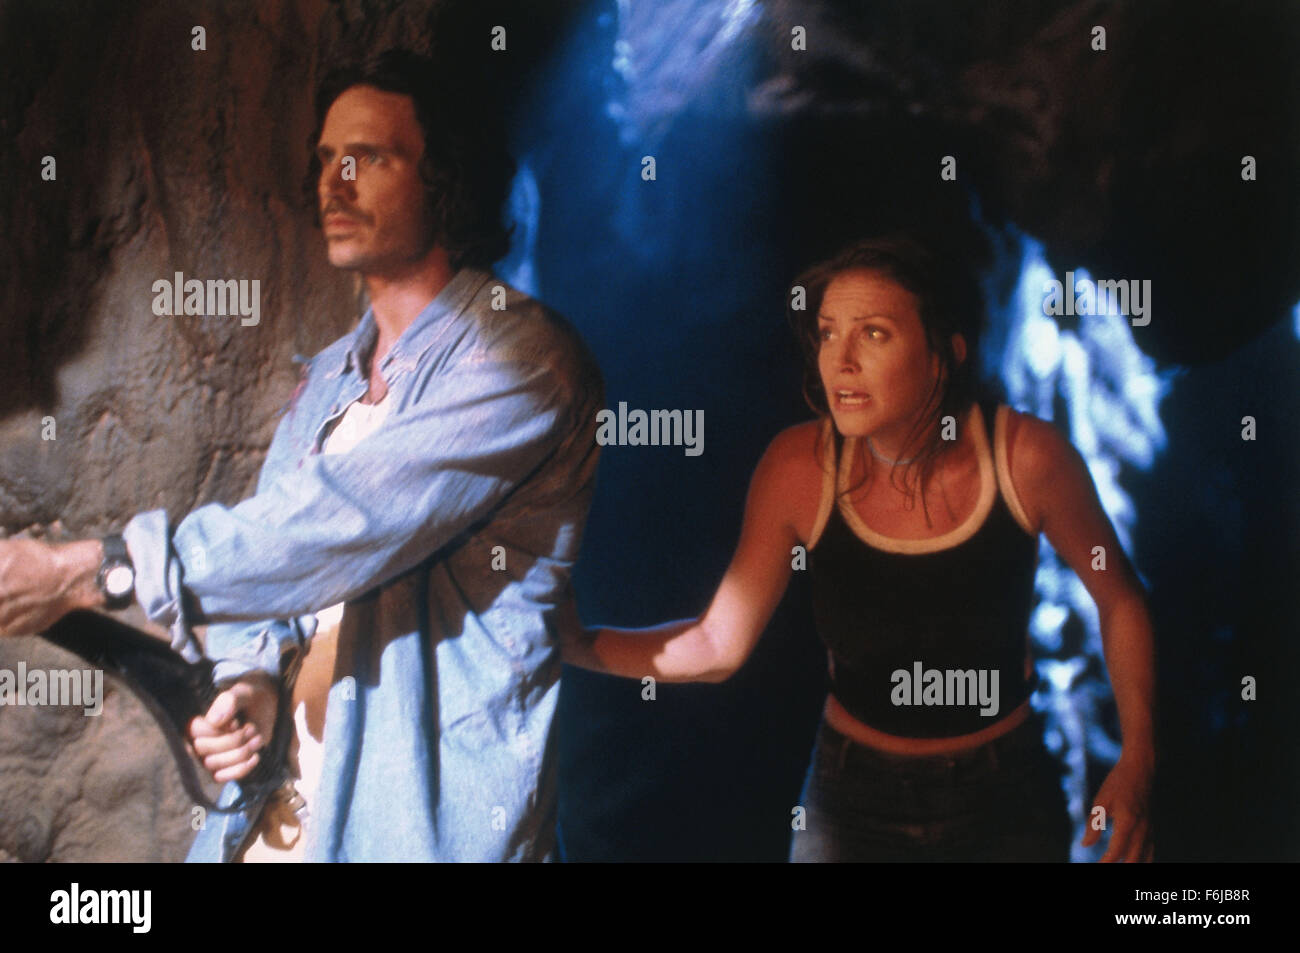 Sep 20, 2003; Puerto Vallarta, Jalisco, MEXICO; SHANE BROLLY and KAARINA AUFRANC star as Daniel Lang and Sandra in the thriller 'Deadly Swarm' directed by Paul Andresen. Stock Photo